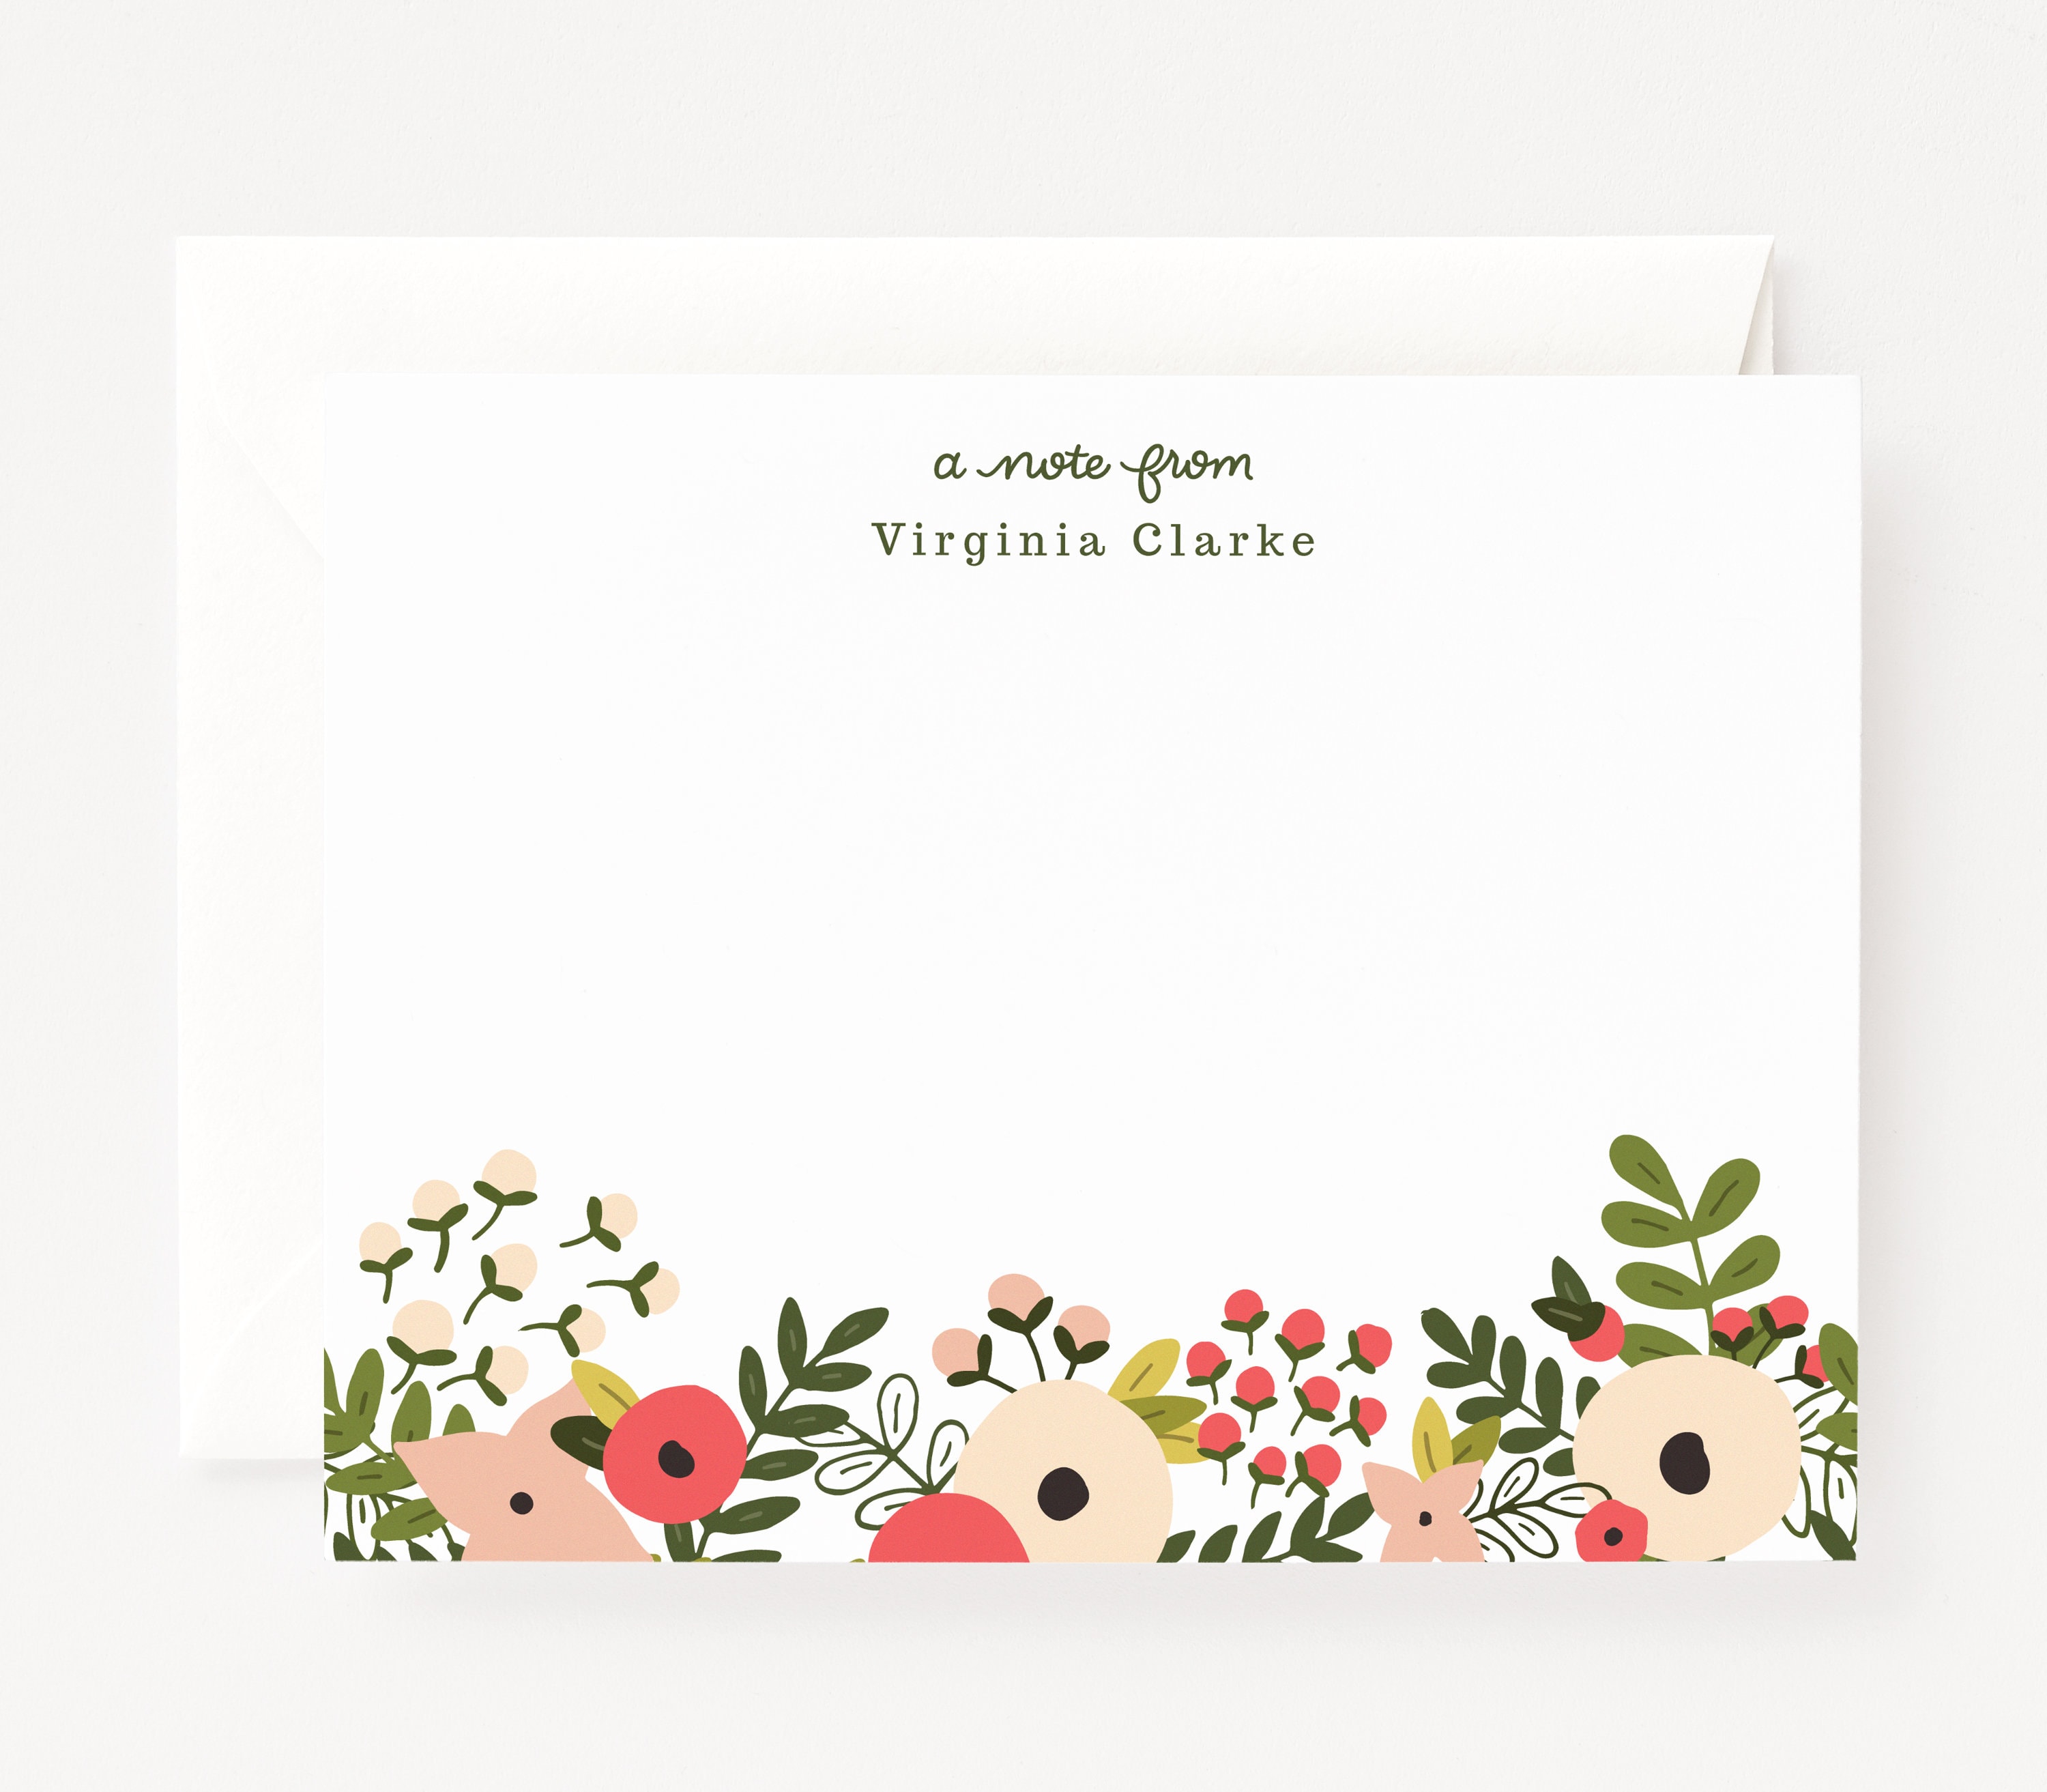 Additional Stationery Cards (Set of 10 FLAT NOTE CARDS) - Nicole